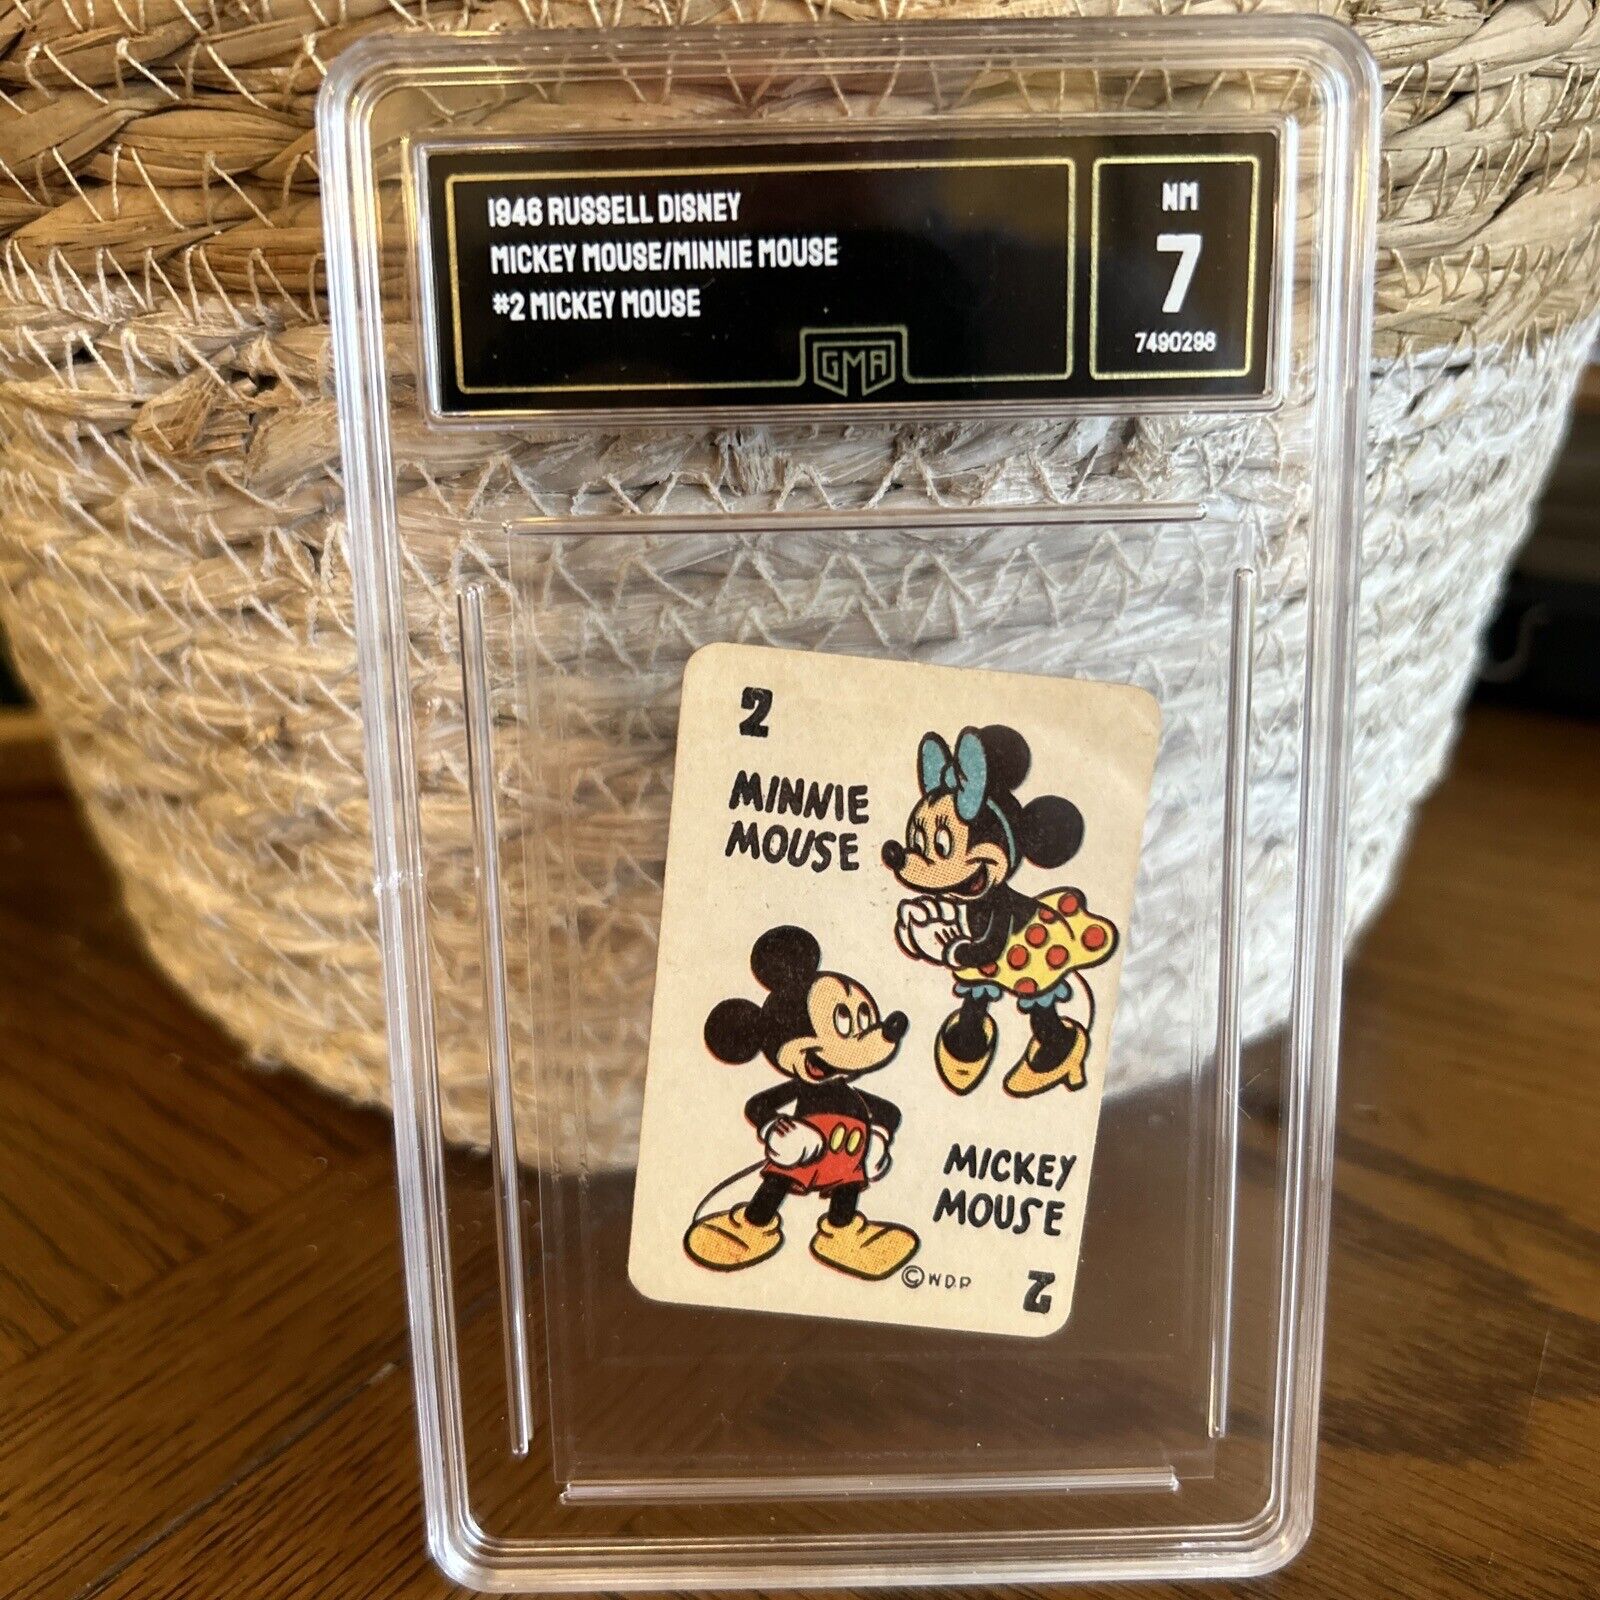 1946 Russell Games Disney Card Game #2 Mickey/Minnie Graded NM 7  Rare